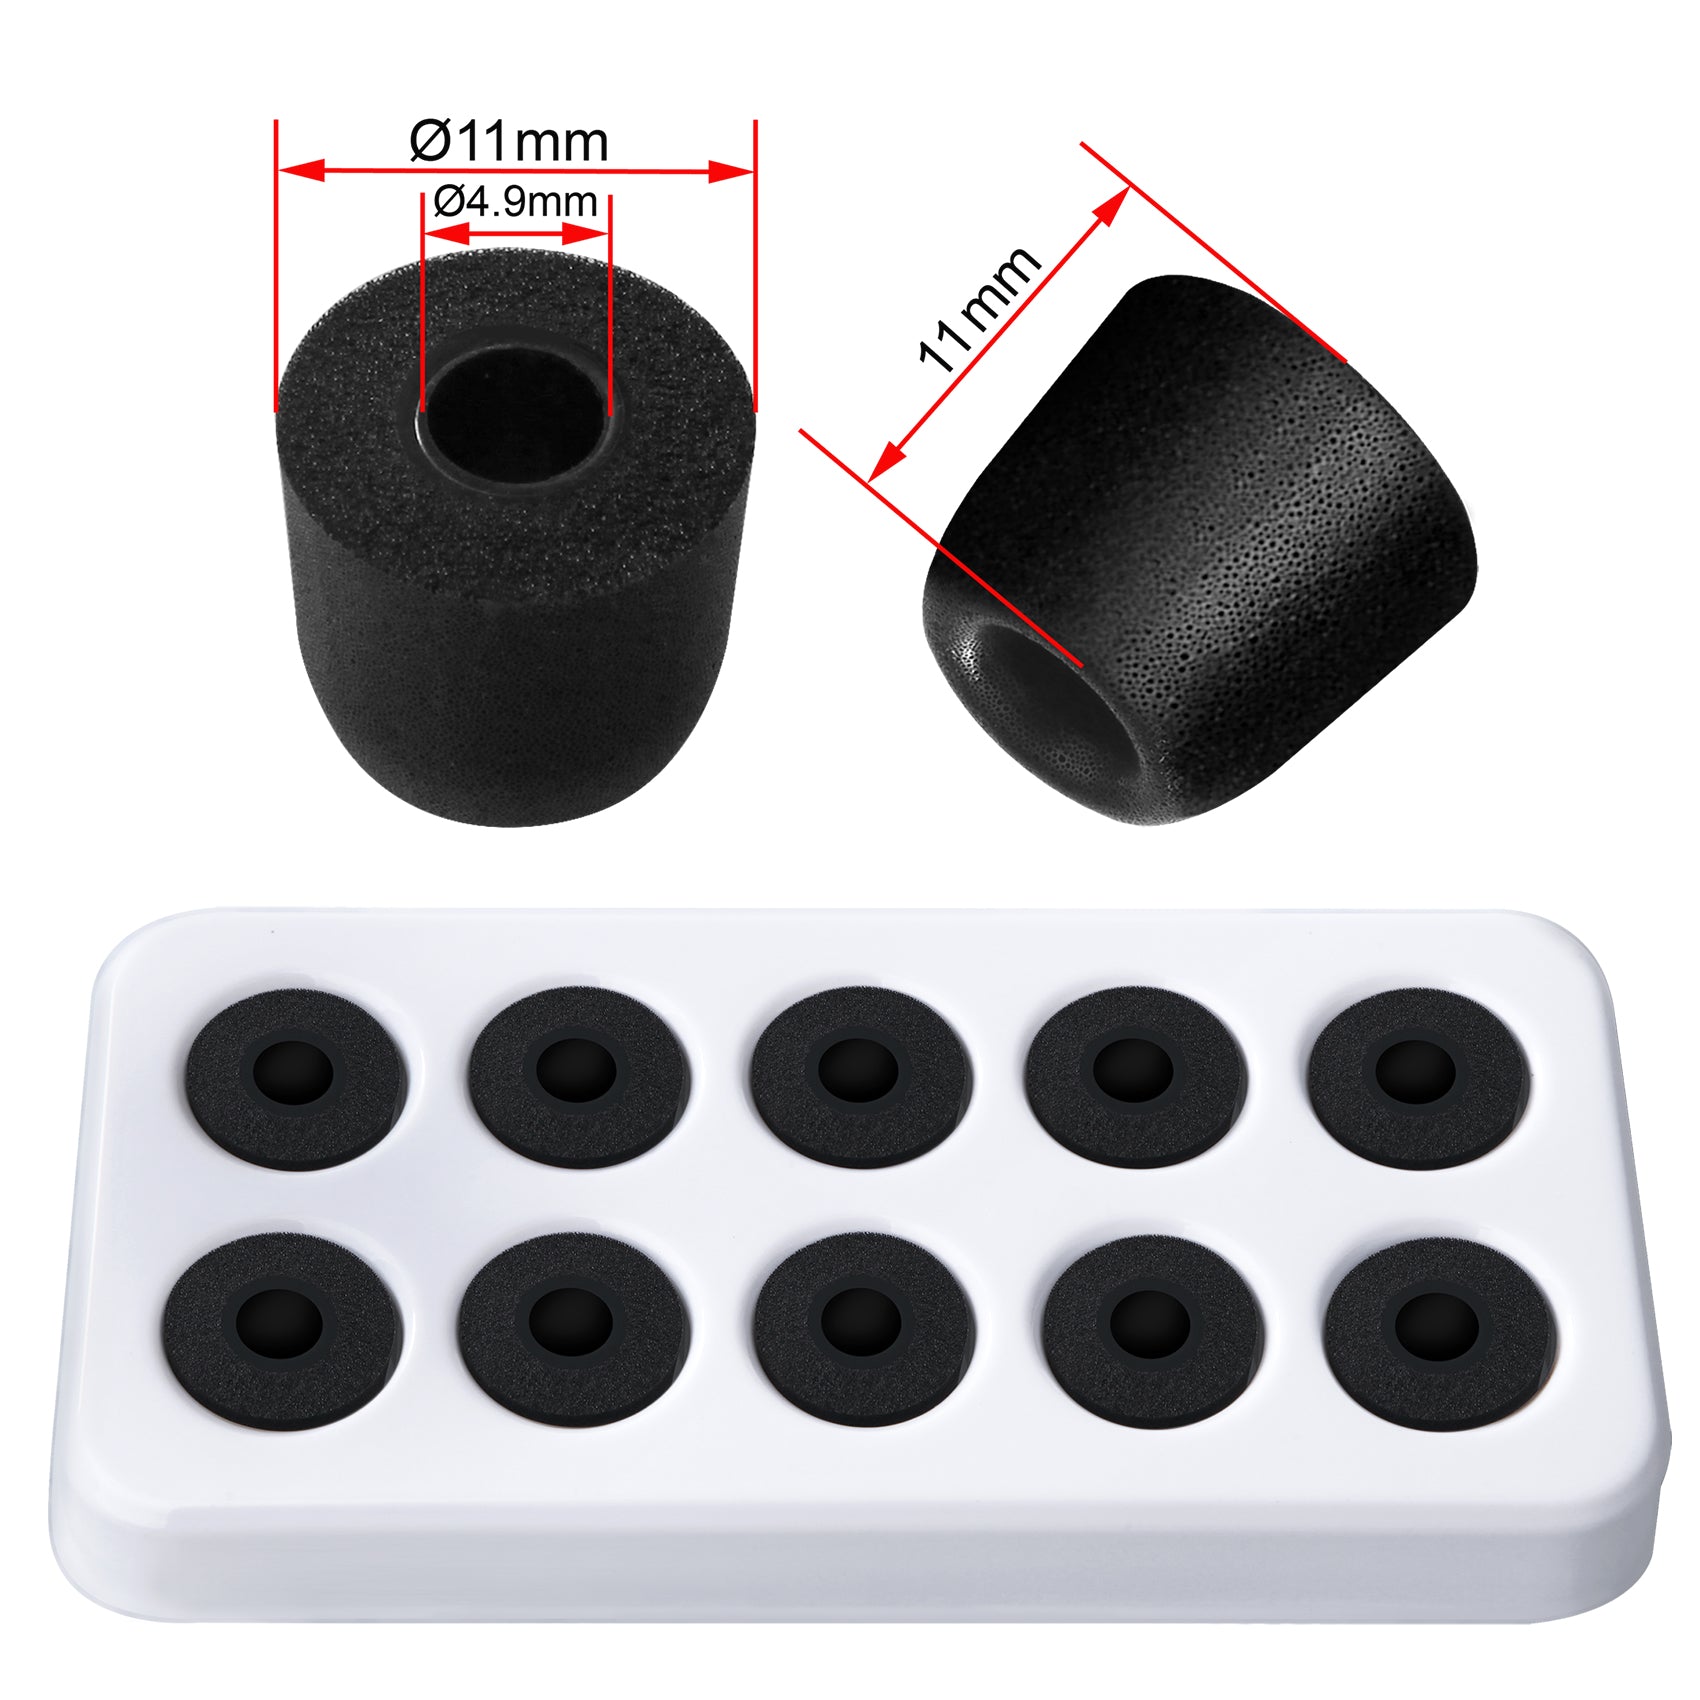 SIMOLIO SM-001S replacement ear tips for wireless tv headphones specification